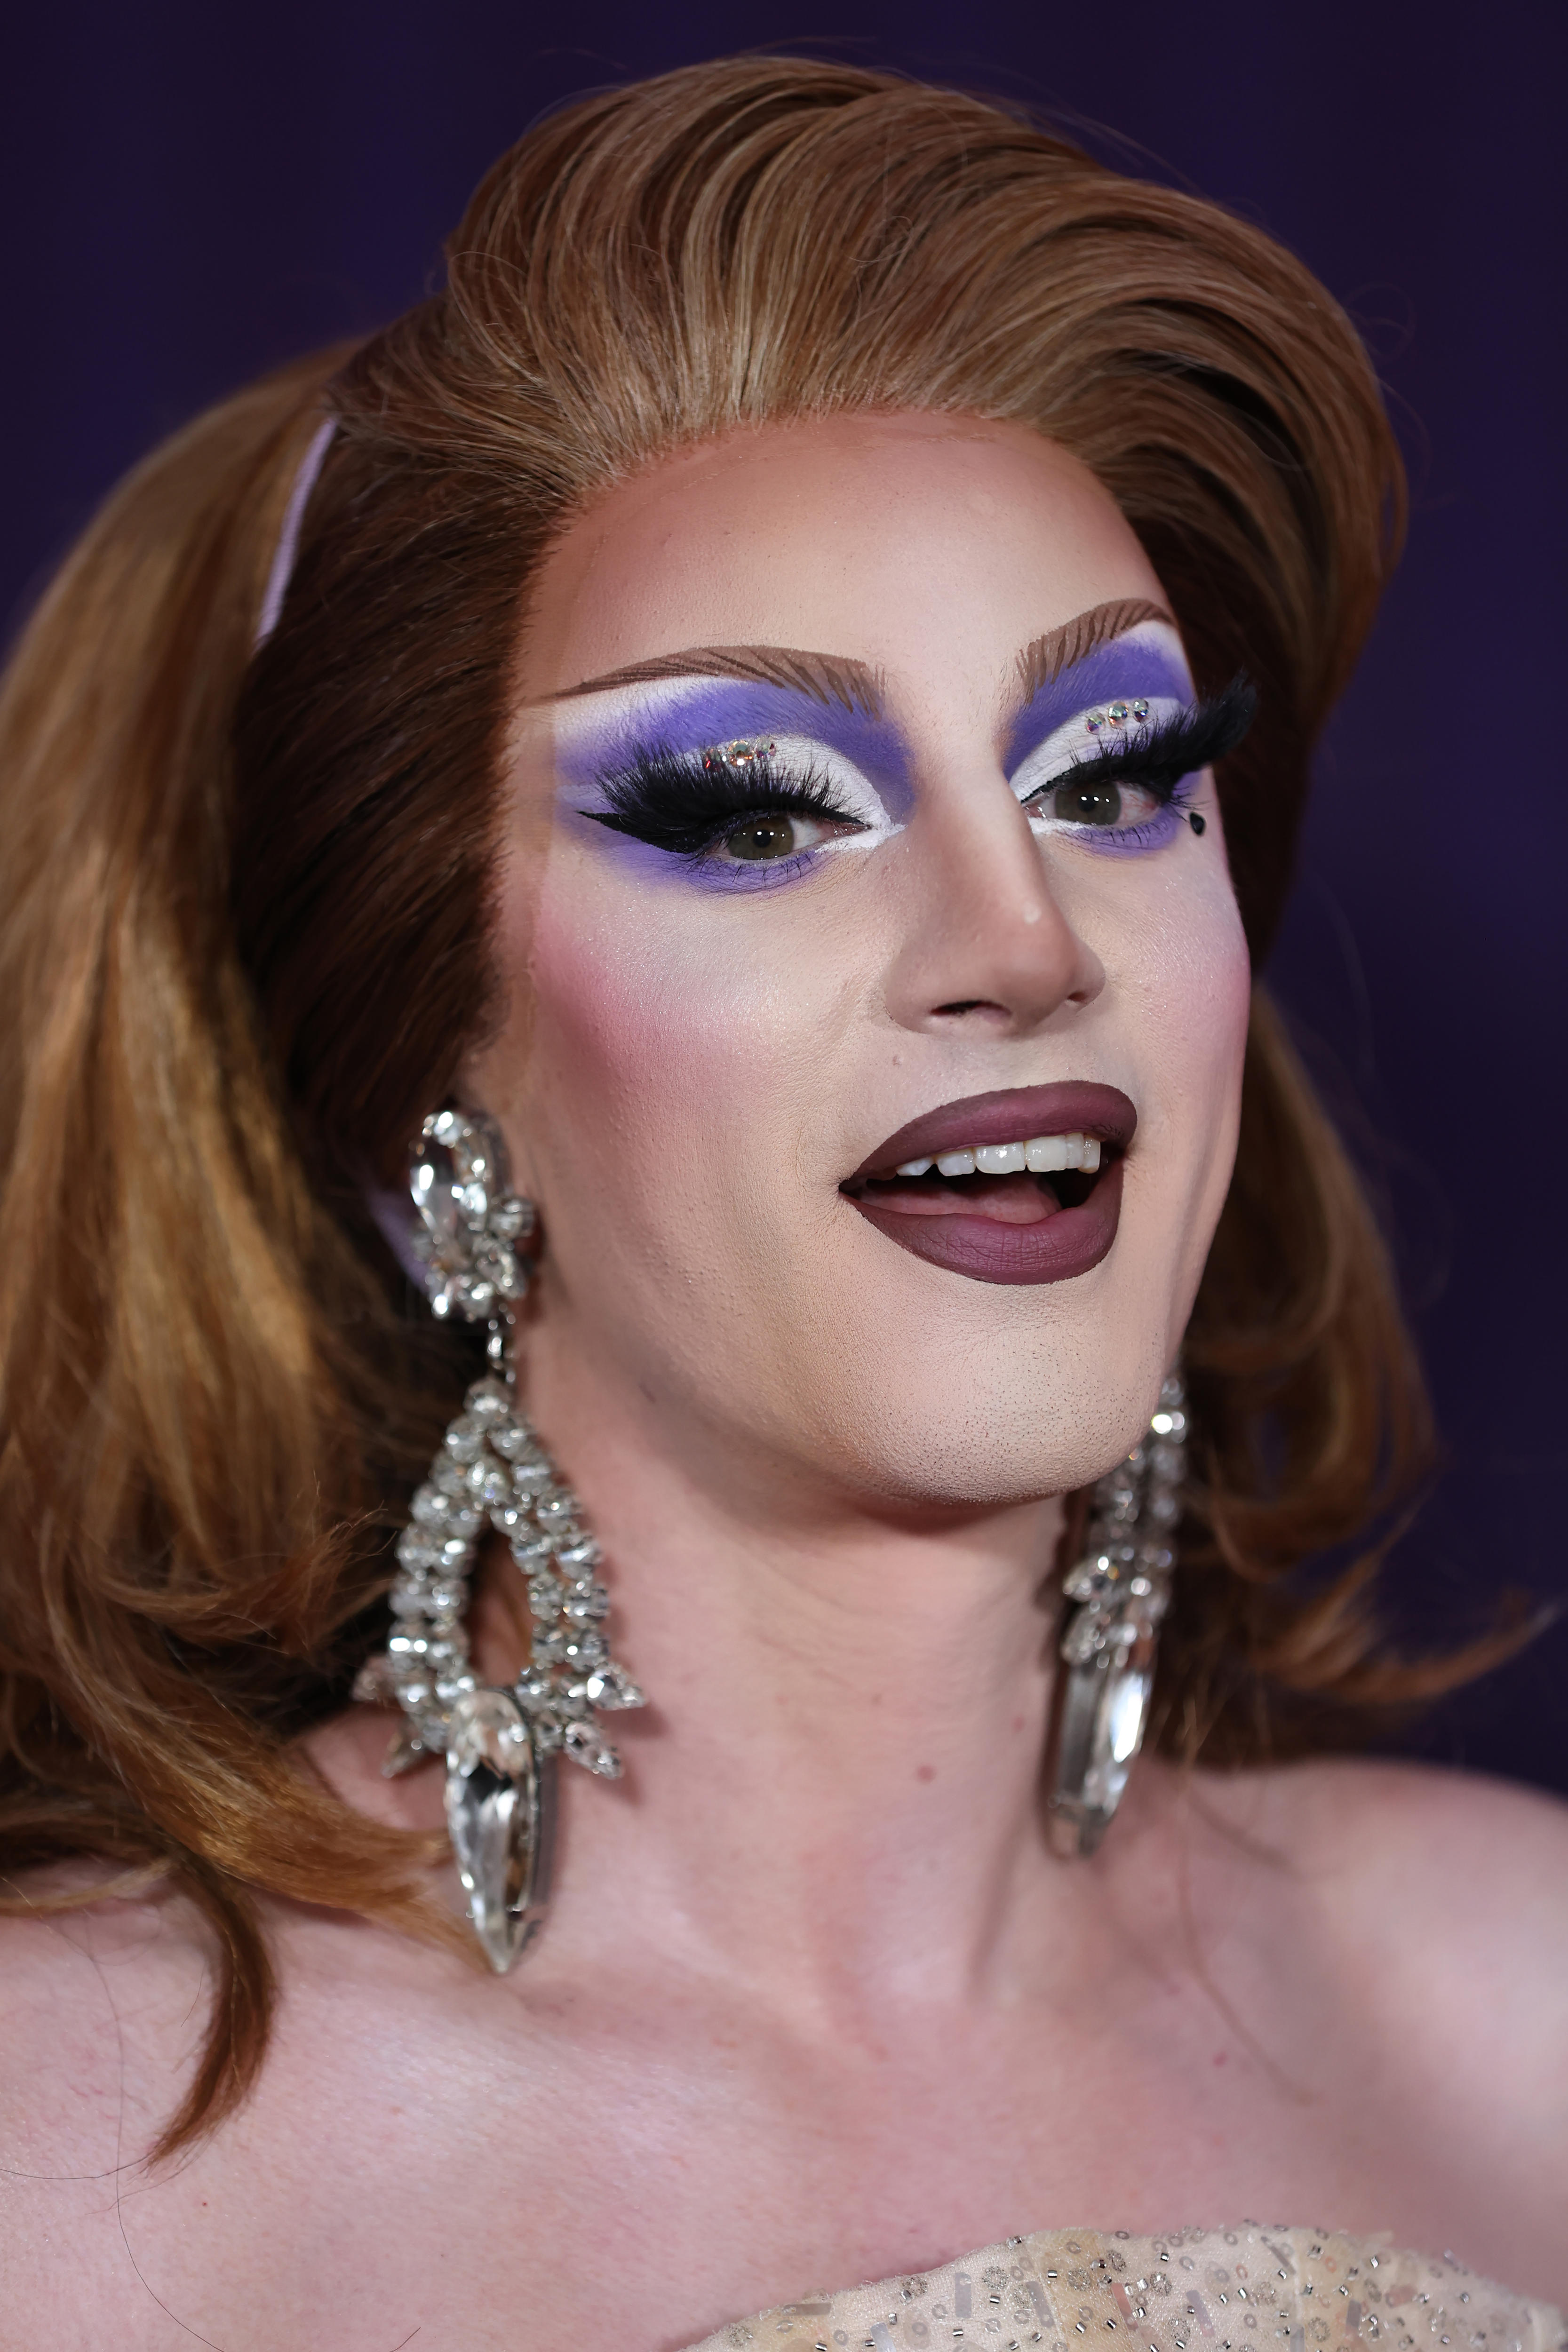 A close up of a drag queen's face and her purple makeup